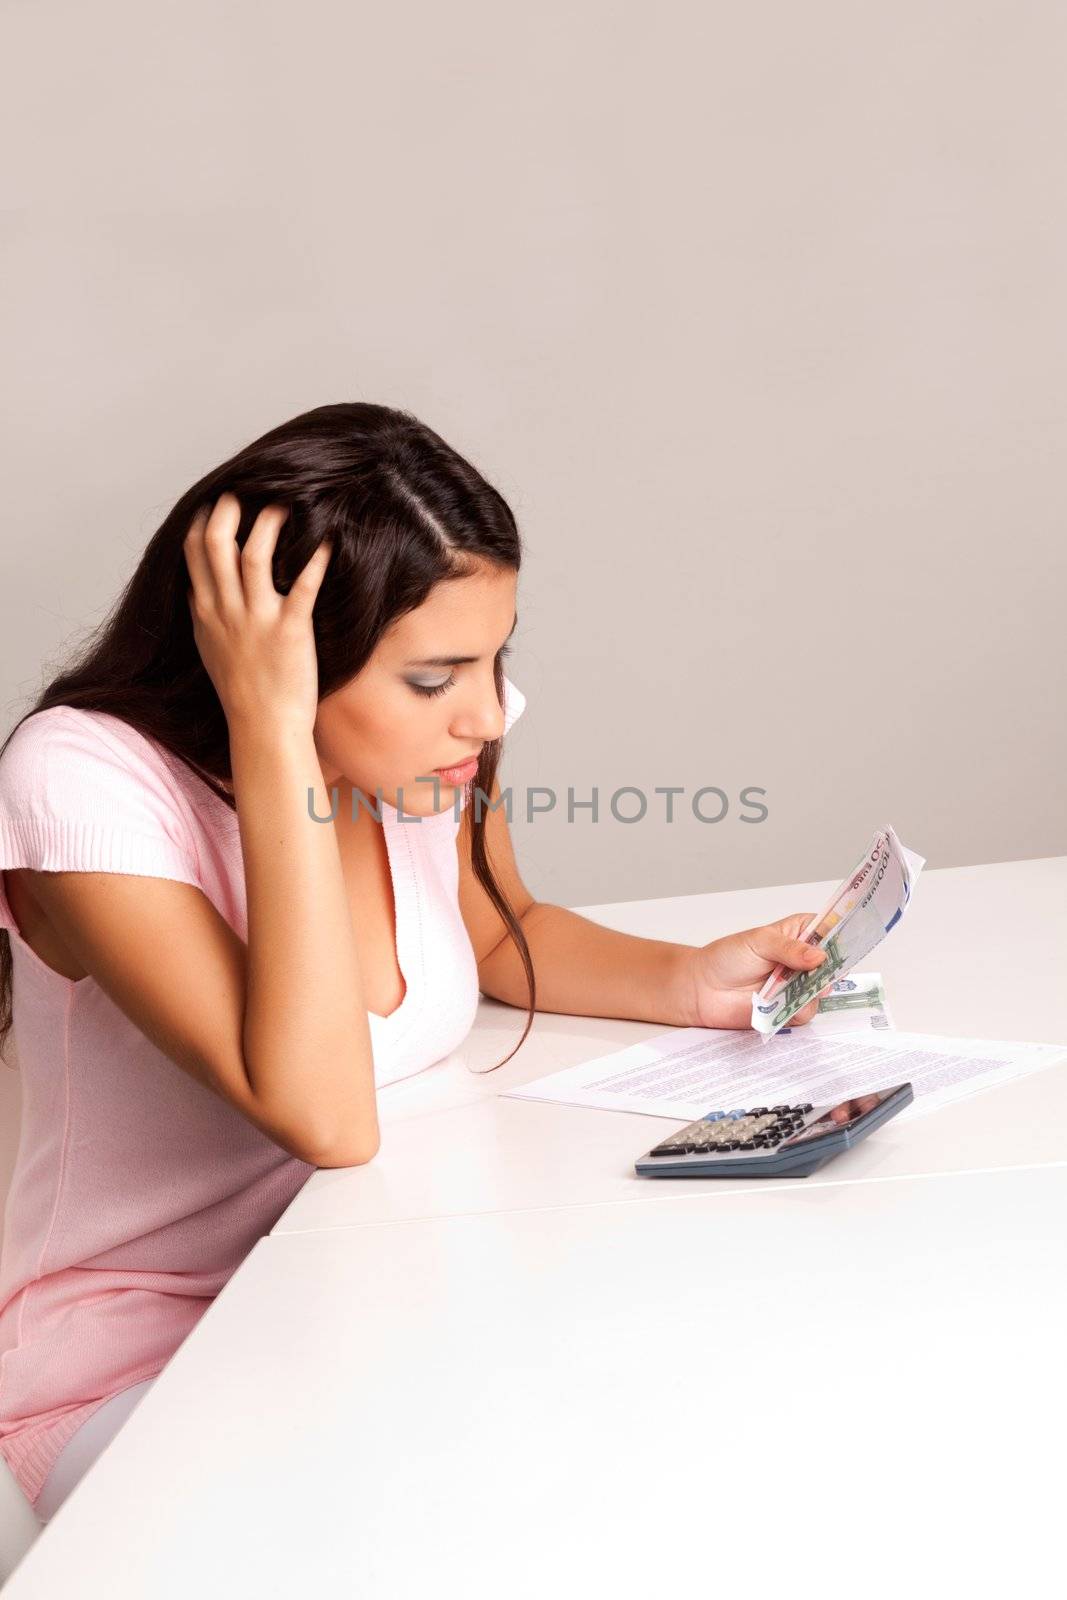 A worried woman counting money and planning a budget